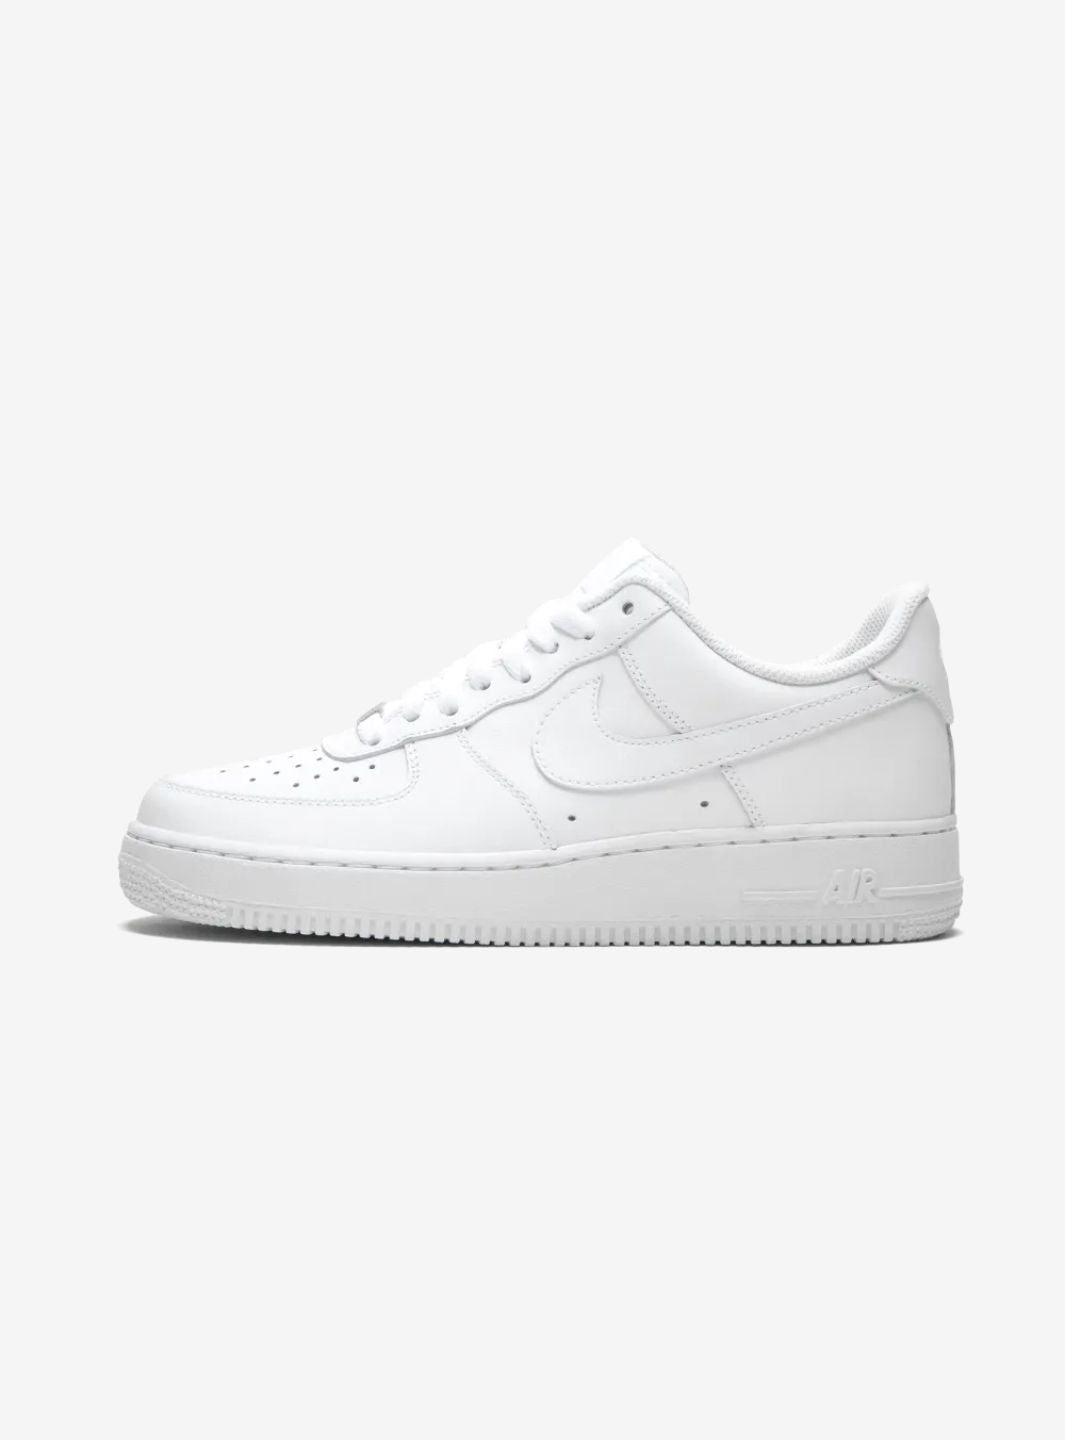 Nike Air Force 1 Low '07 White - DH2920-111 | ResellZone